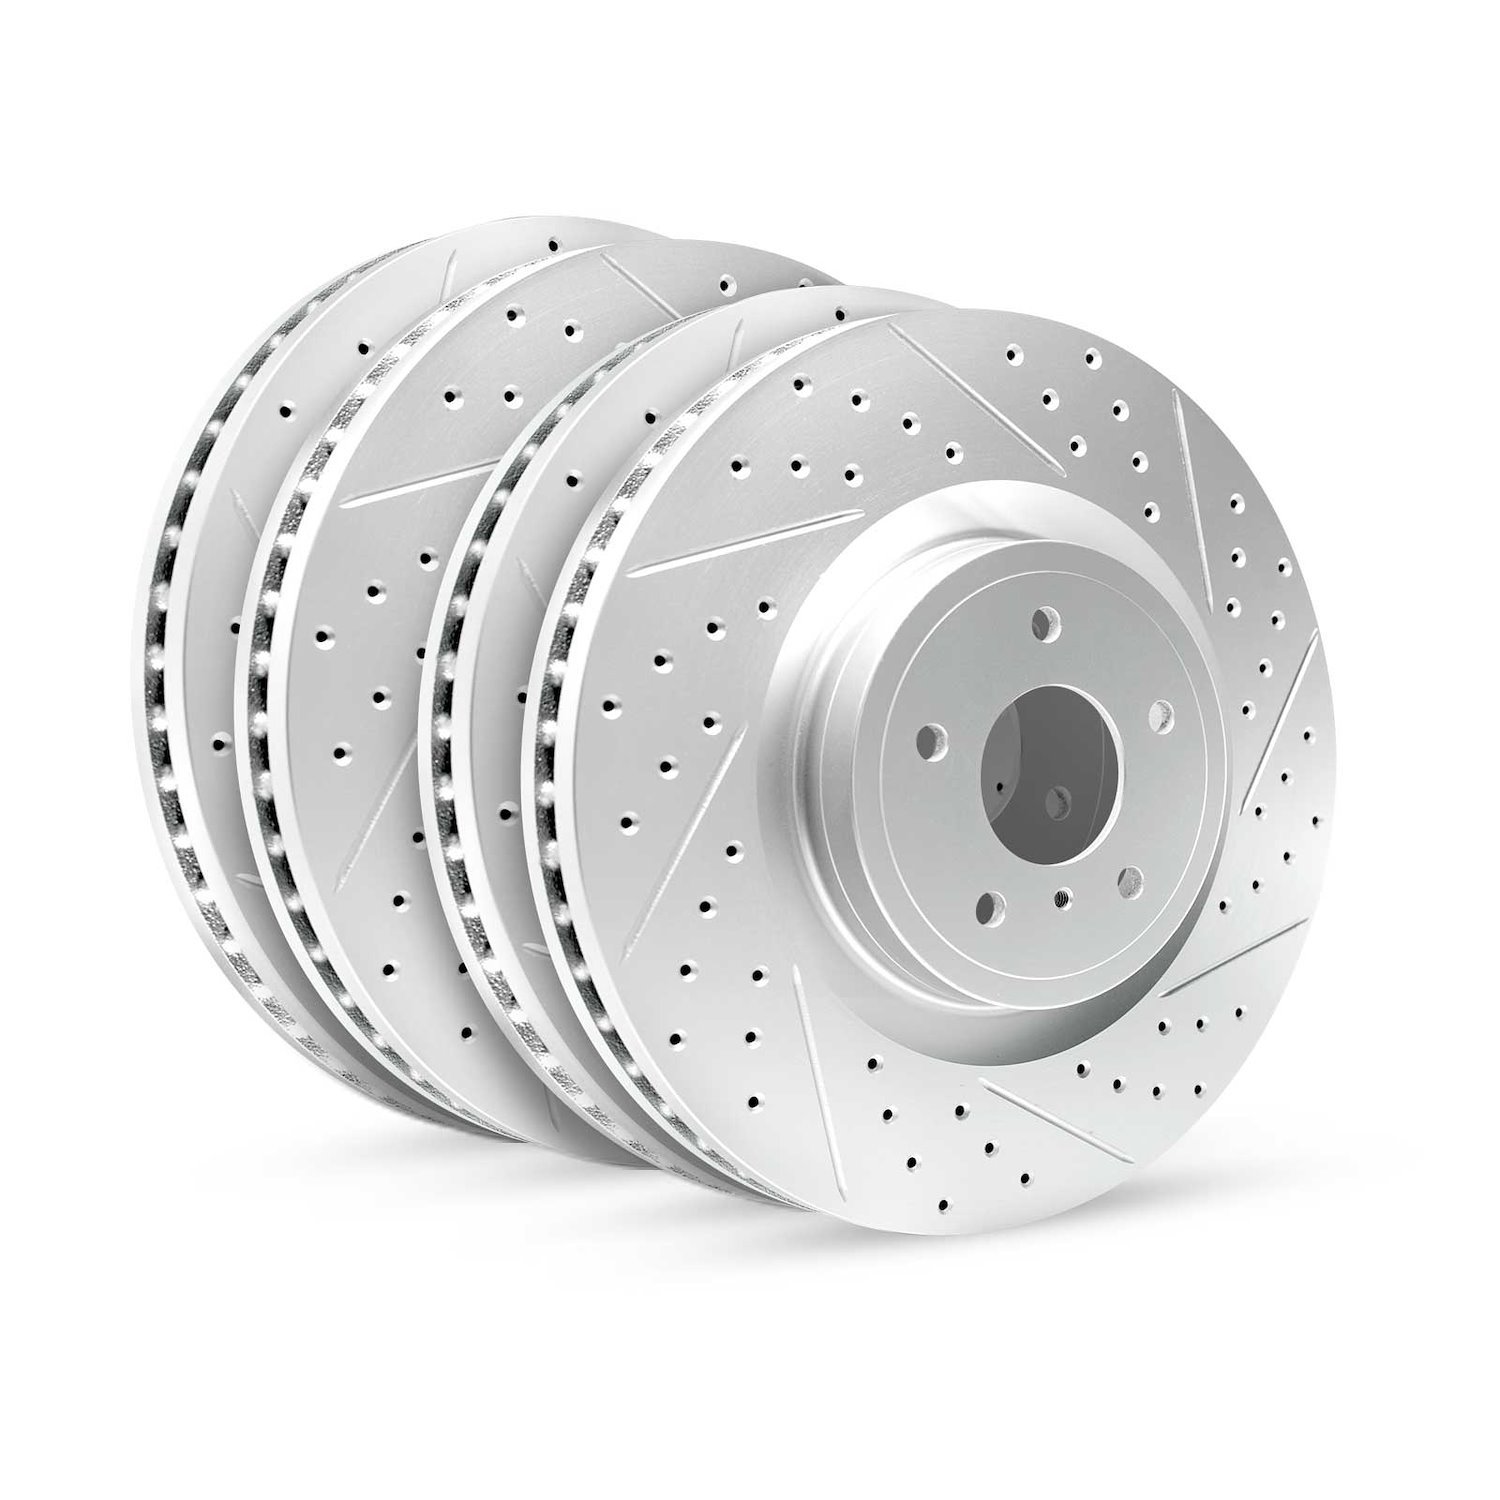 GEO-Carbon Drilled/Slotted Rotors, 2007-2011 Lexus/Toyota/Scion, Position: Front/Rear